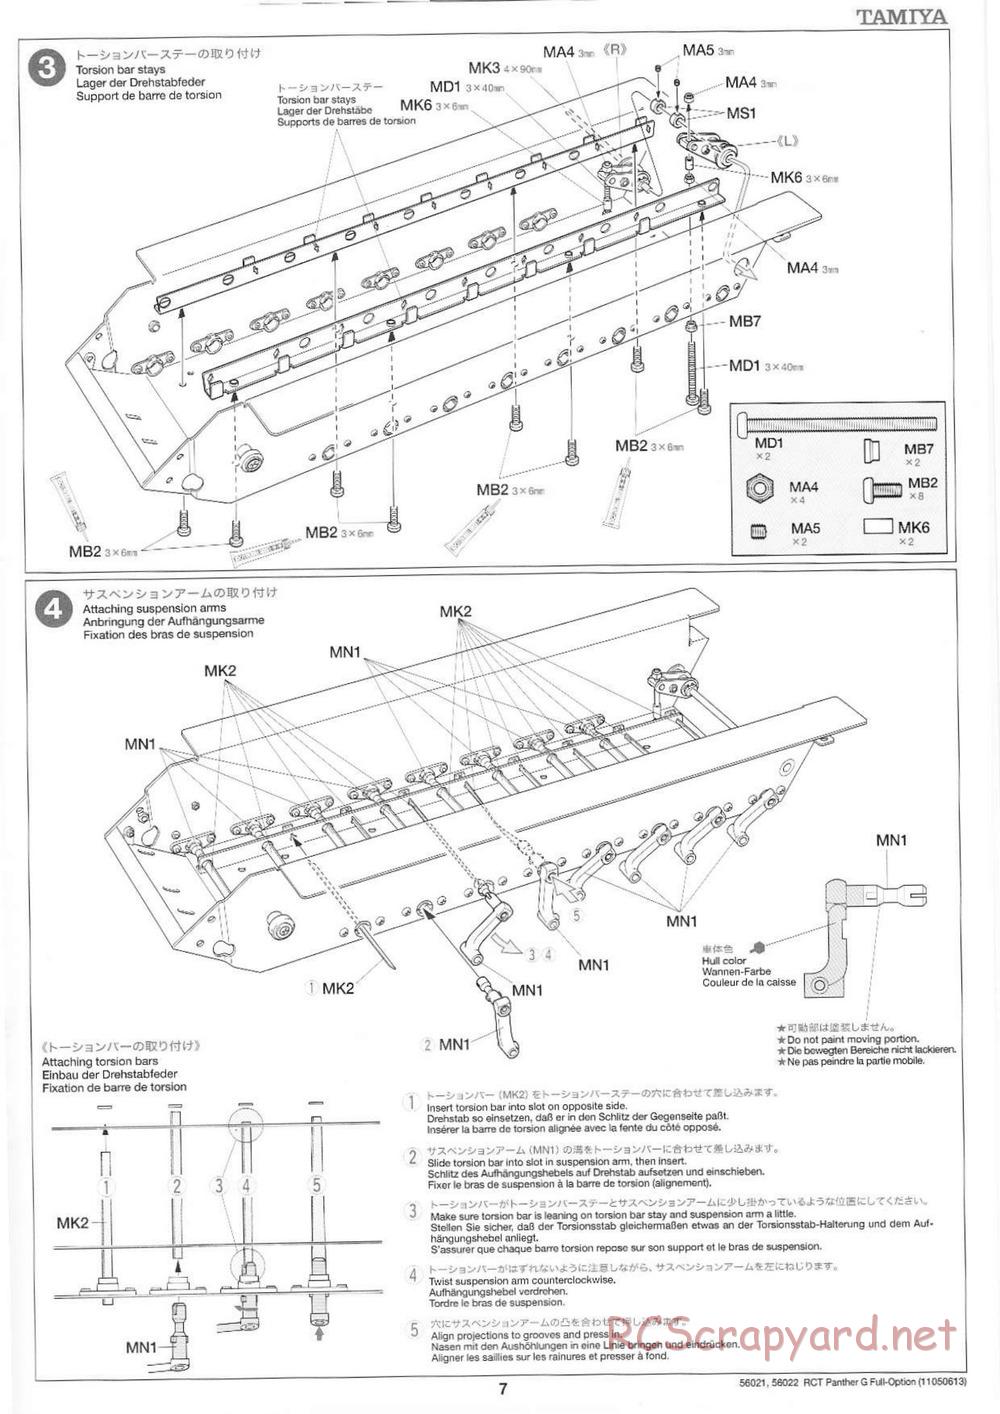 Tamiya - Panther Type G - 1/16 Scale Chassis - Manual - Page 7